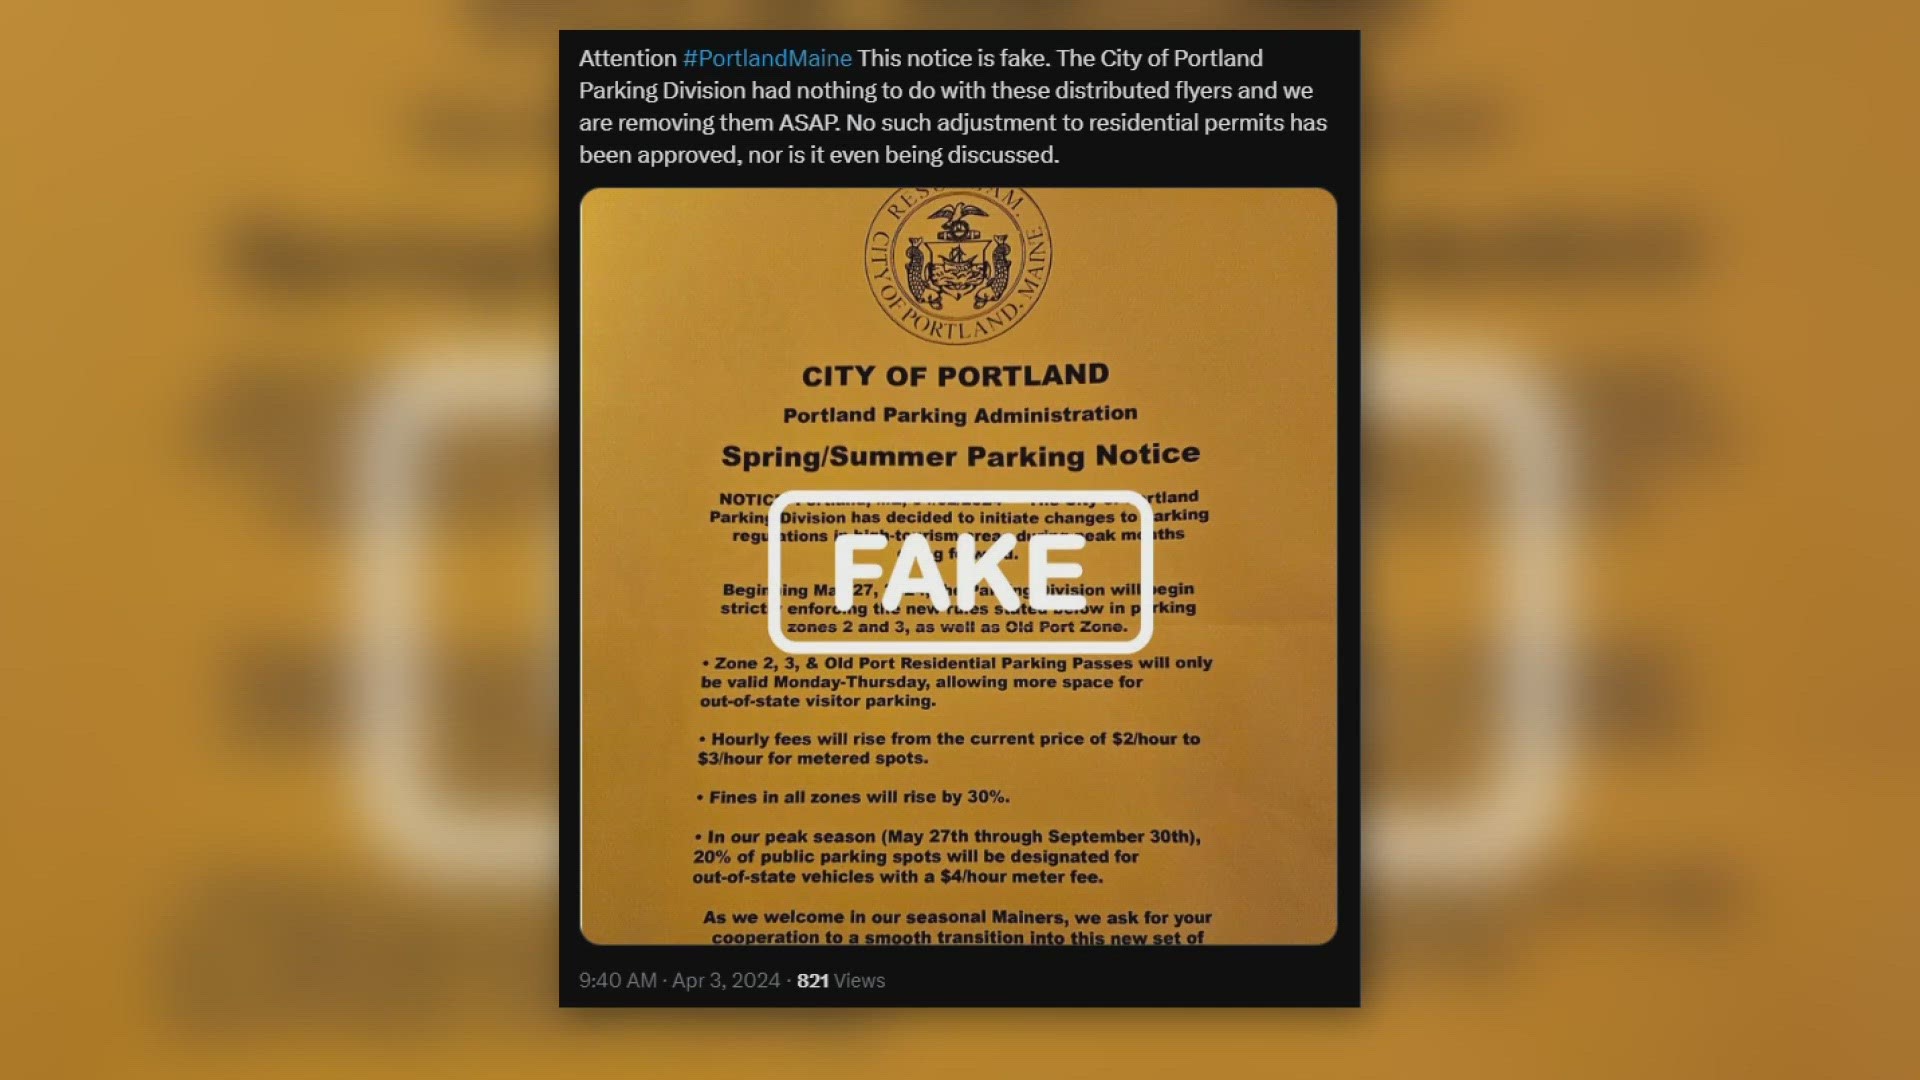 Hoax flyers were distributed throughout the city detailing new parking restrictions and price increases for spring and summer due to "increased tourism."